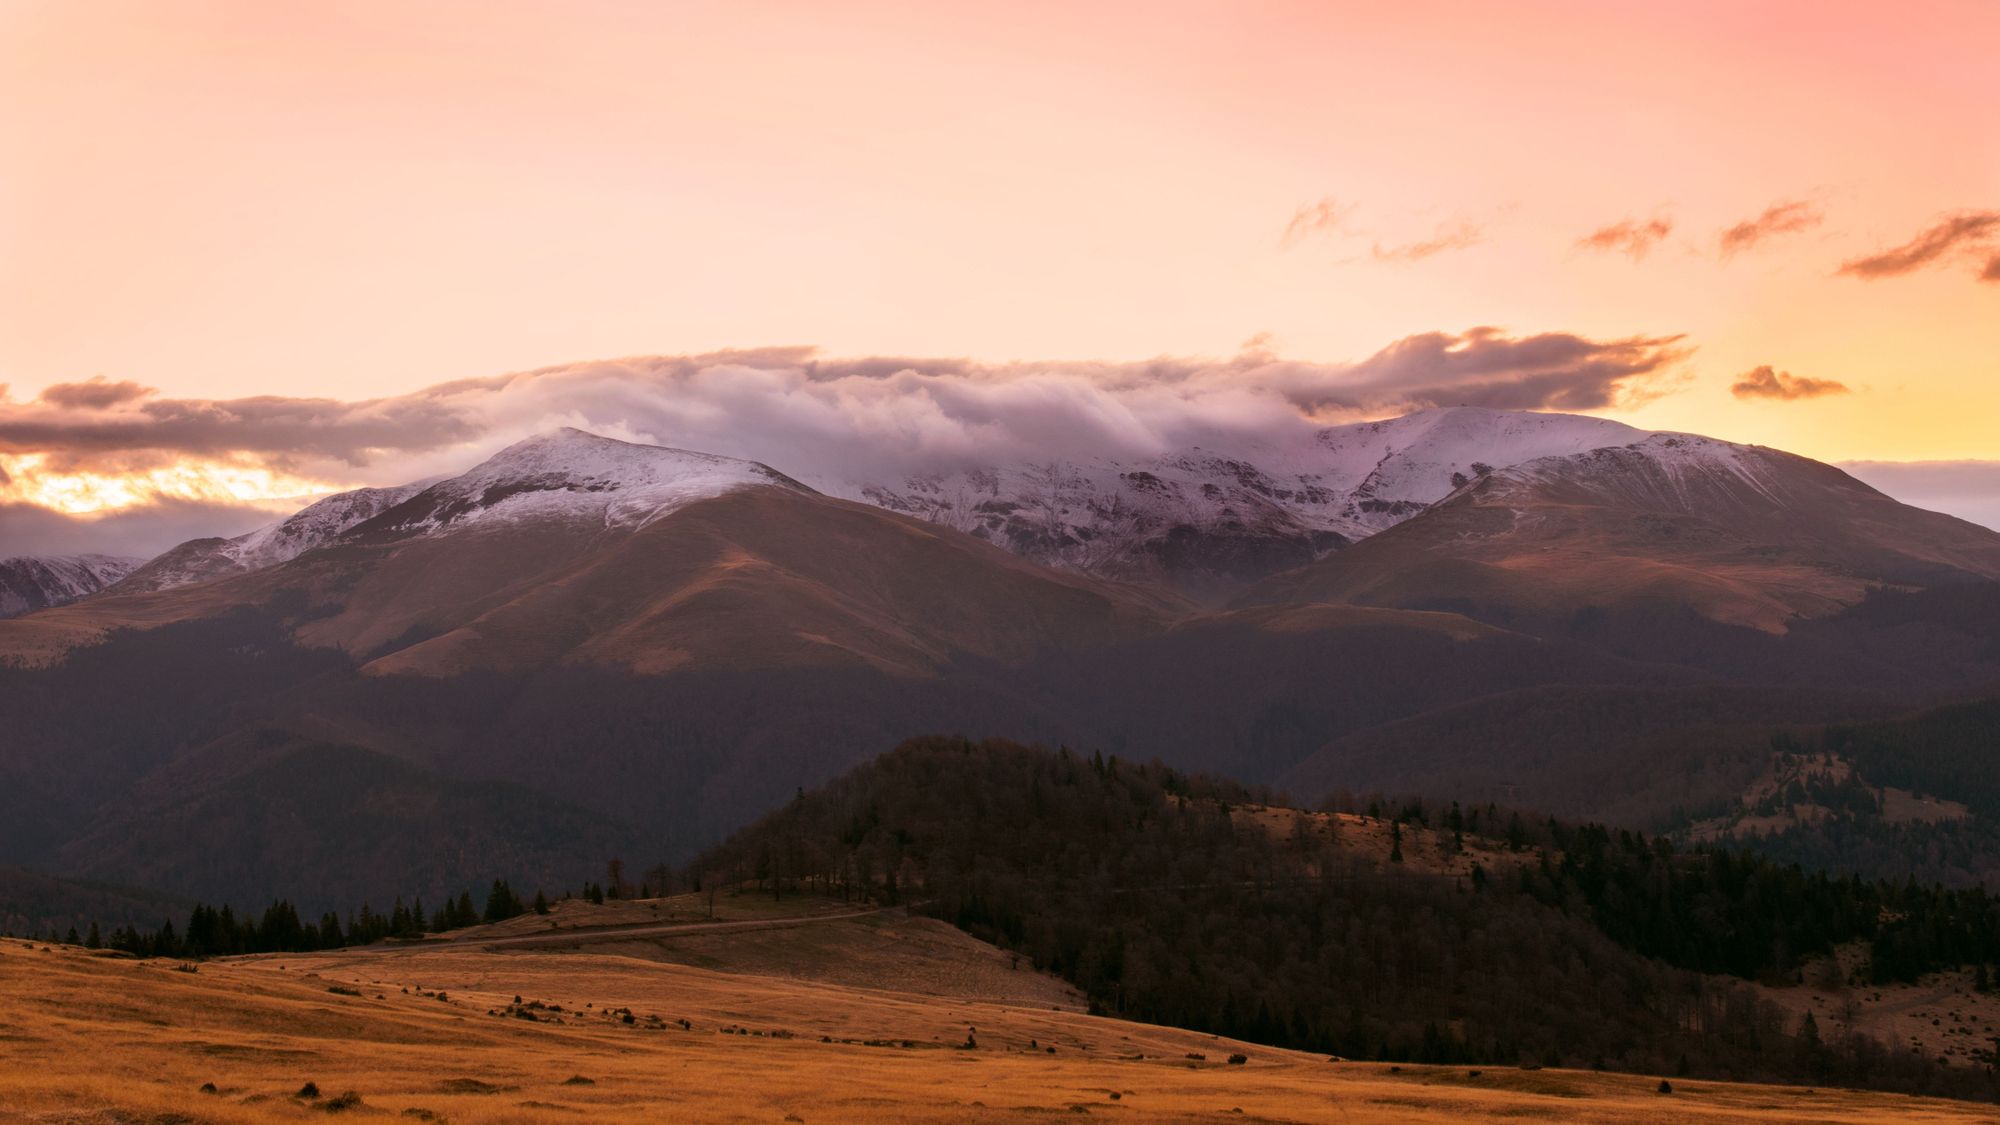 Clouds descend over the Tarcu Mountains of Romania as the sun sets. Photo: Getty